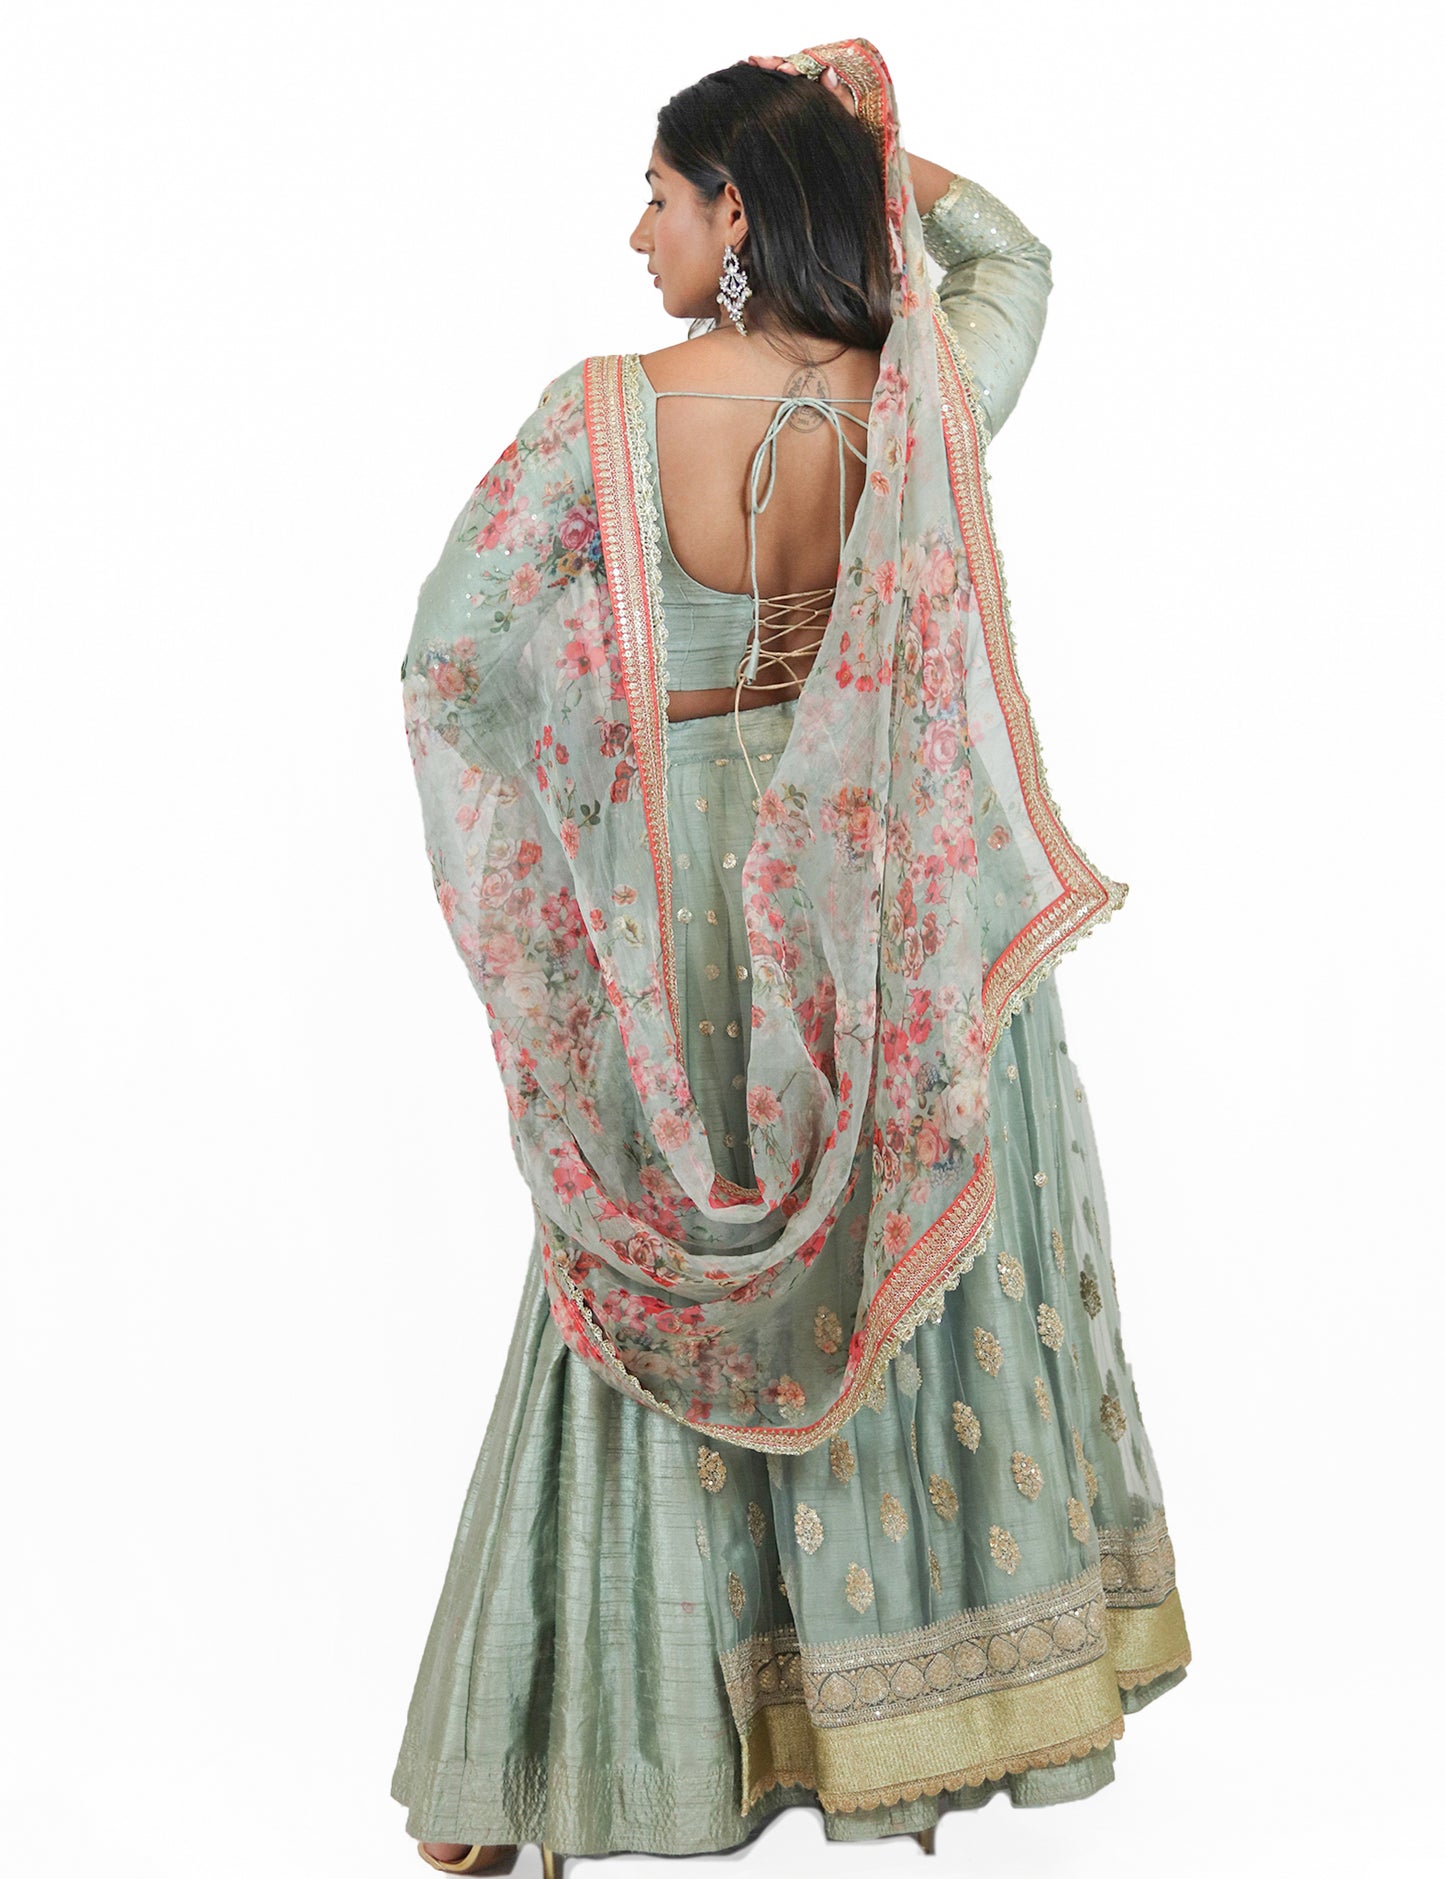 Rent Mint Green Lehenga and Blouse with Floral Dupatta